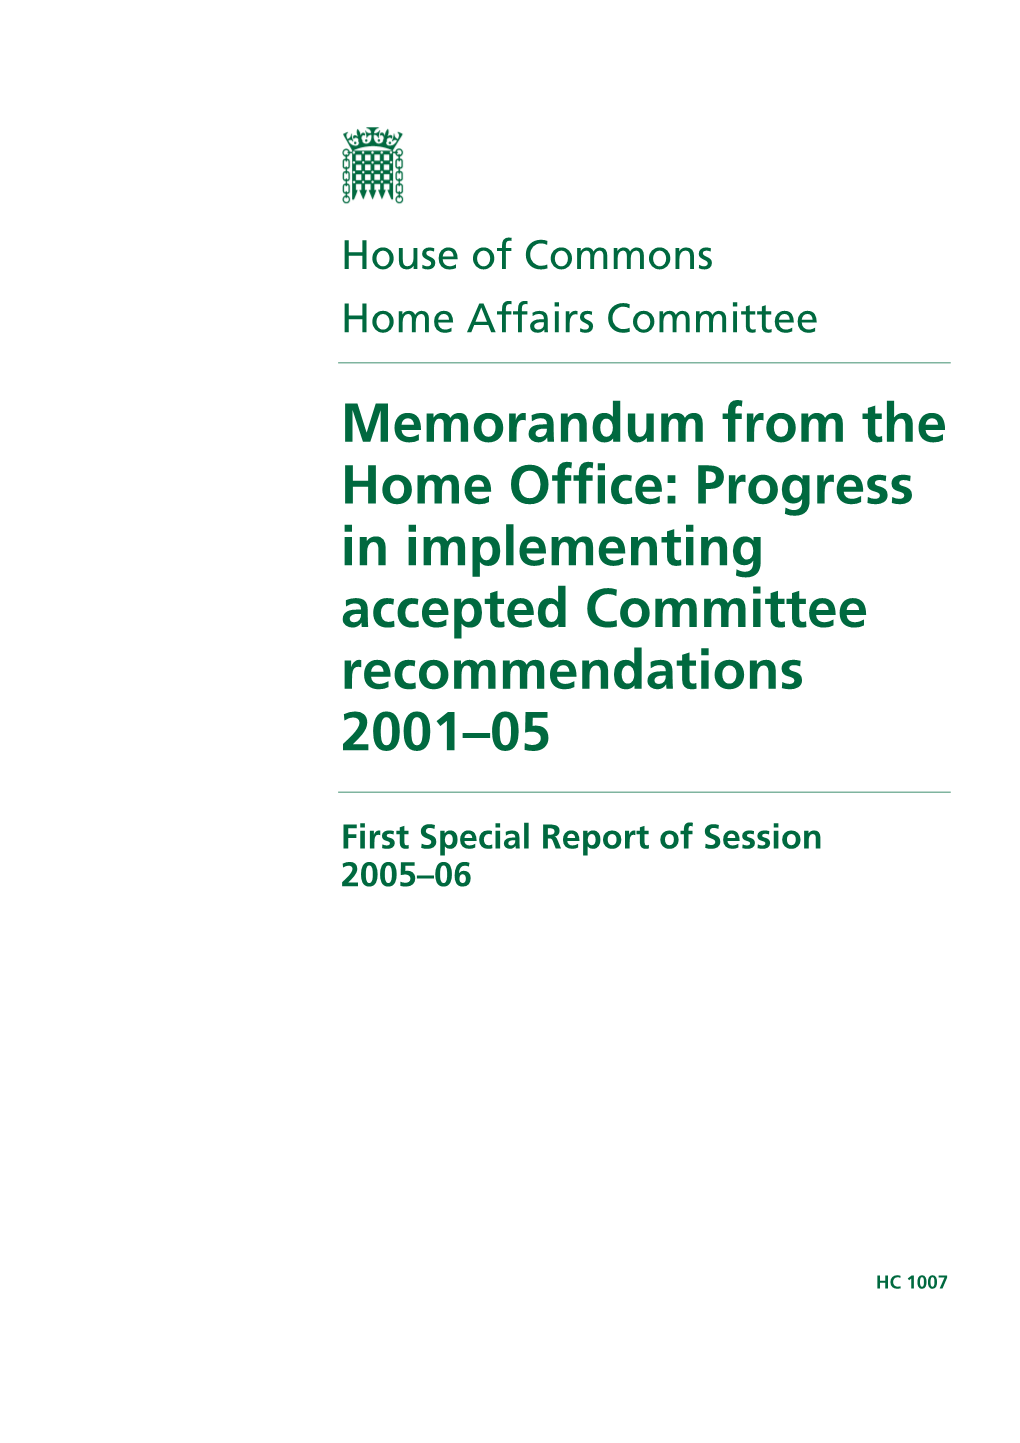 Memorandum from the Home Office: Progress in Implementing Accepted Committee Recommendations 2001–05